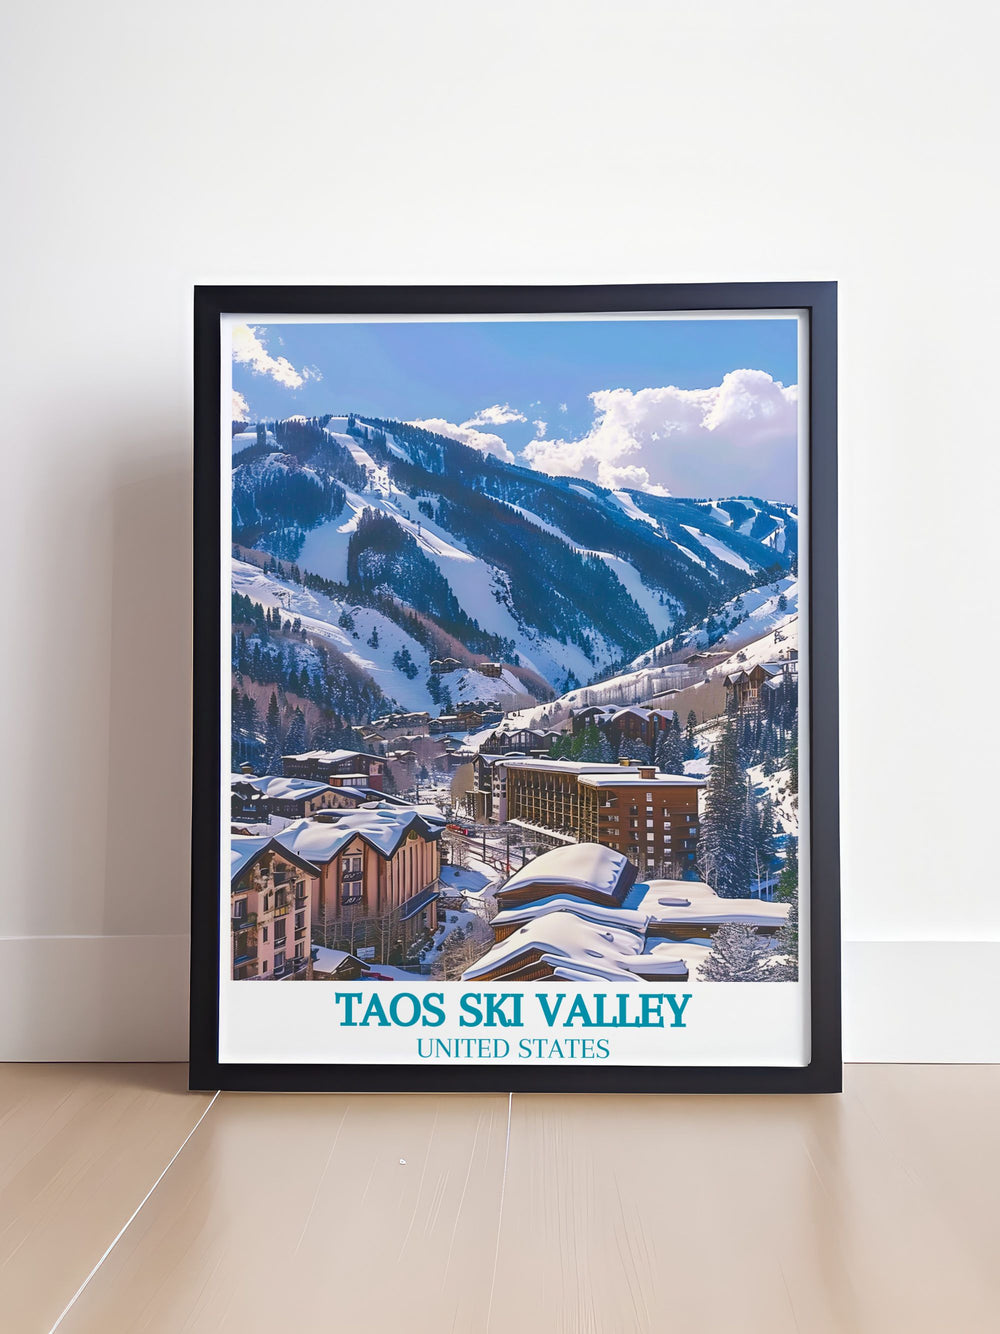 Uncover the natural beauty of Taos with this detailed art print, highlighting the ski resorts picturesque landscape and welcoming atmosphere.